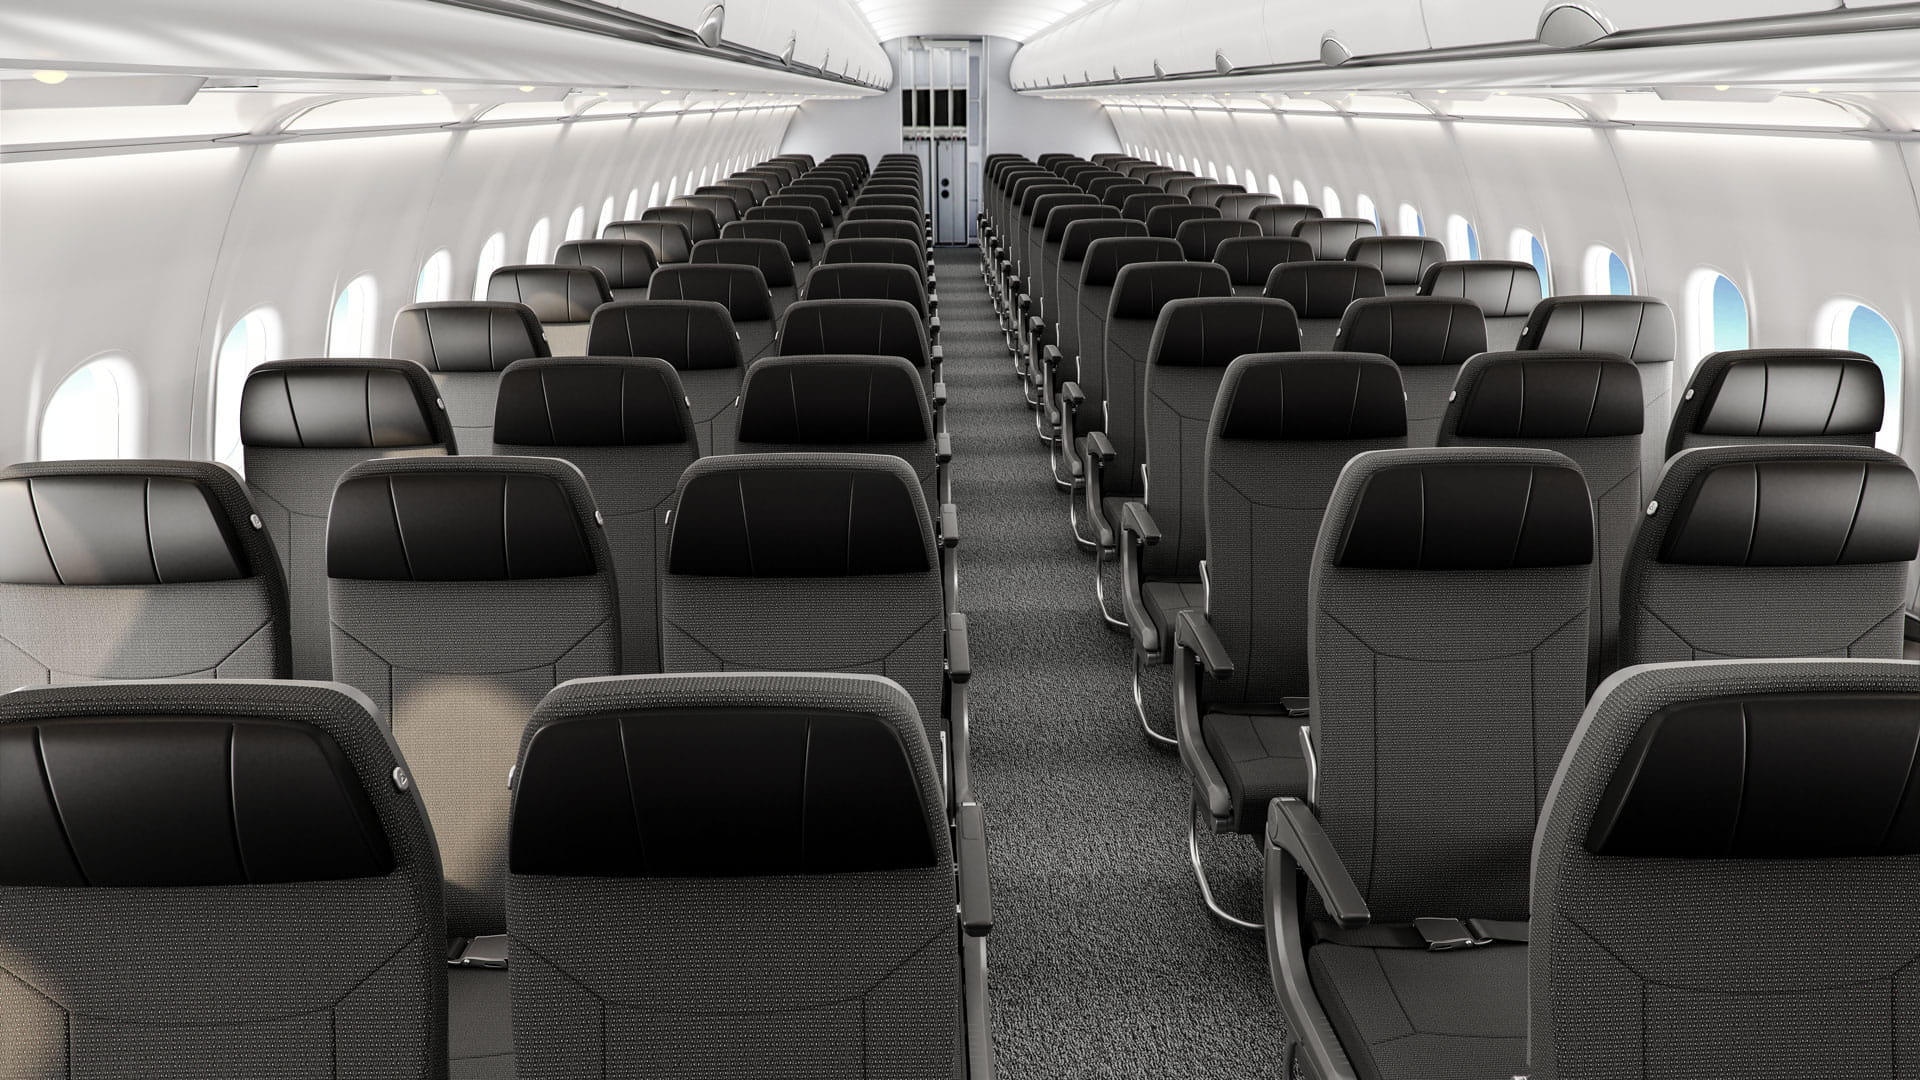 Cabin of a single-aisle commercial jet